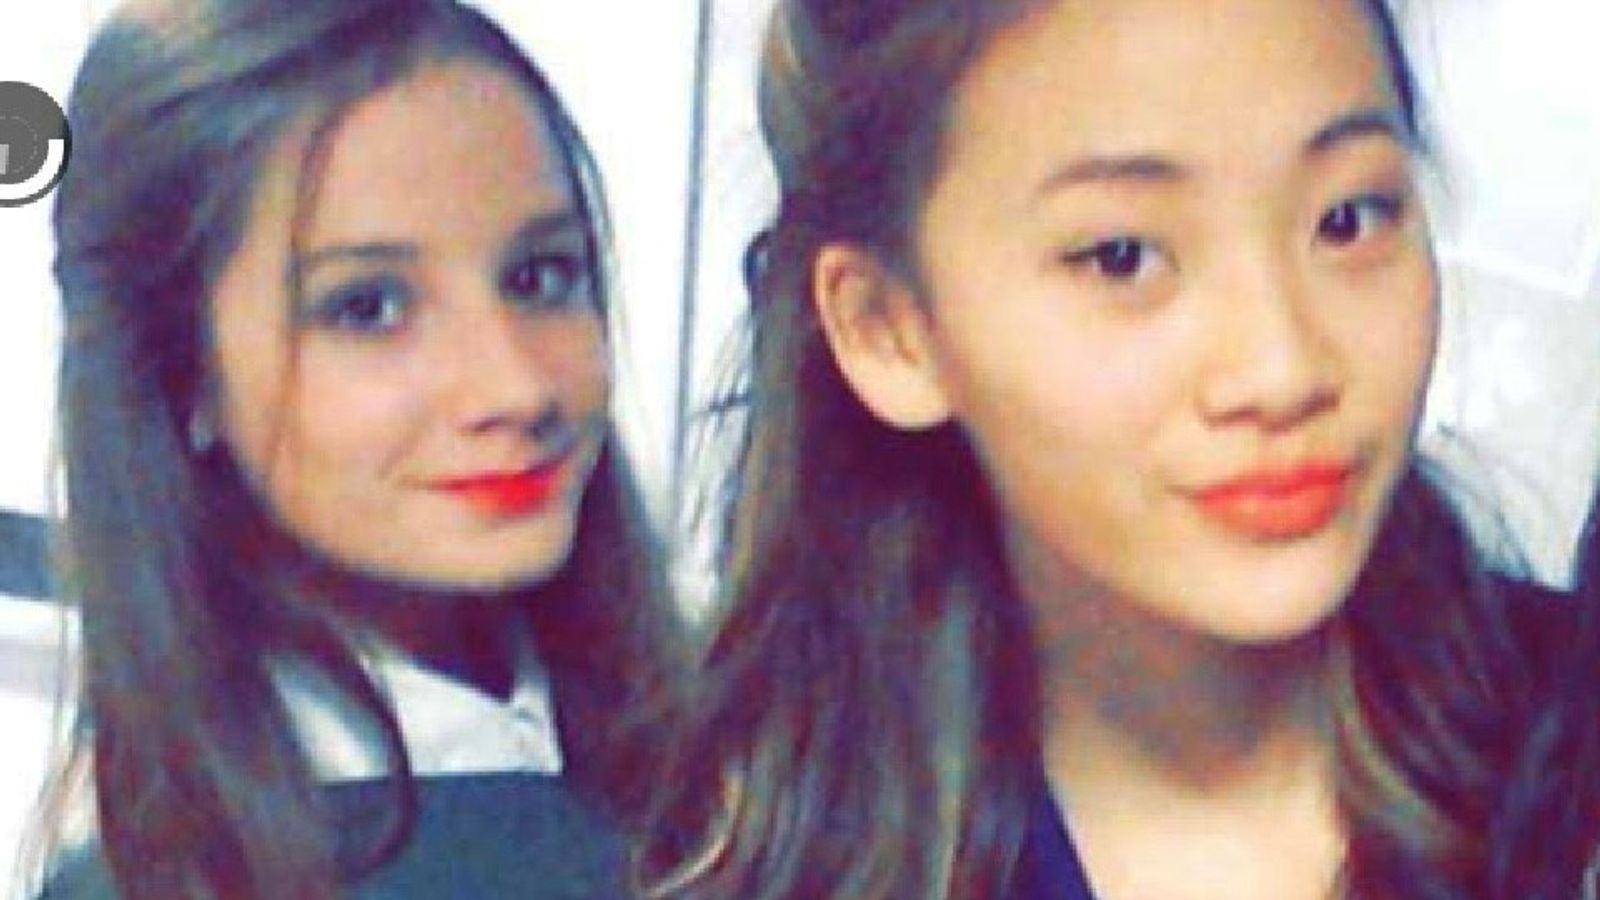 Molly Russell: Friend of 14-year-old who died from self-harm speaks out over Online Safety Bill